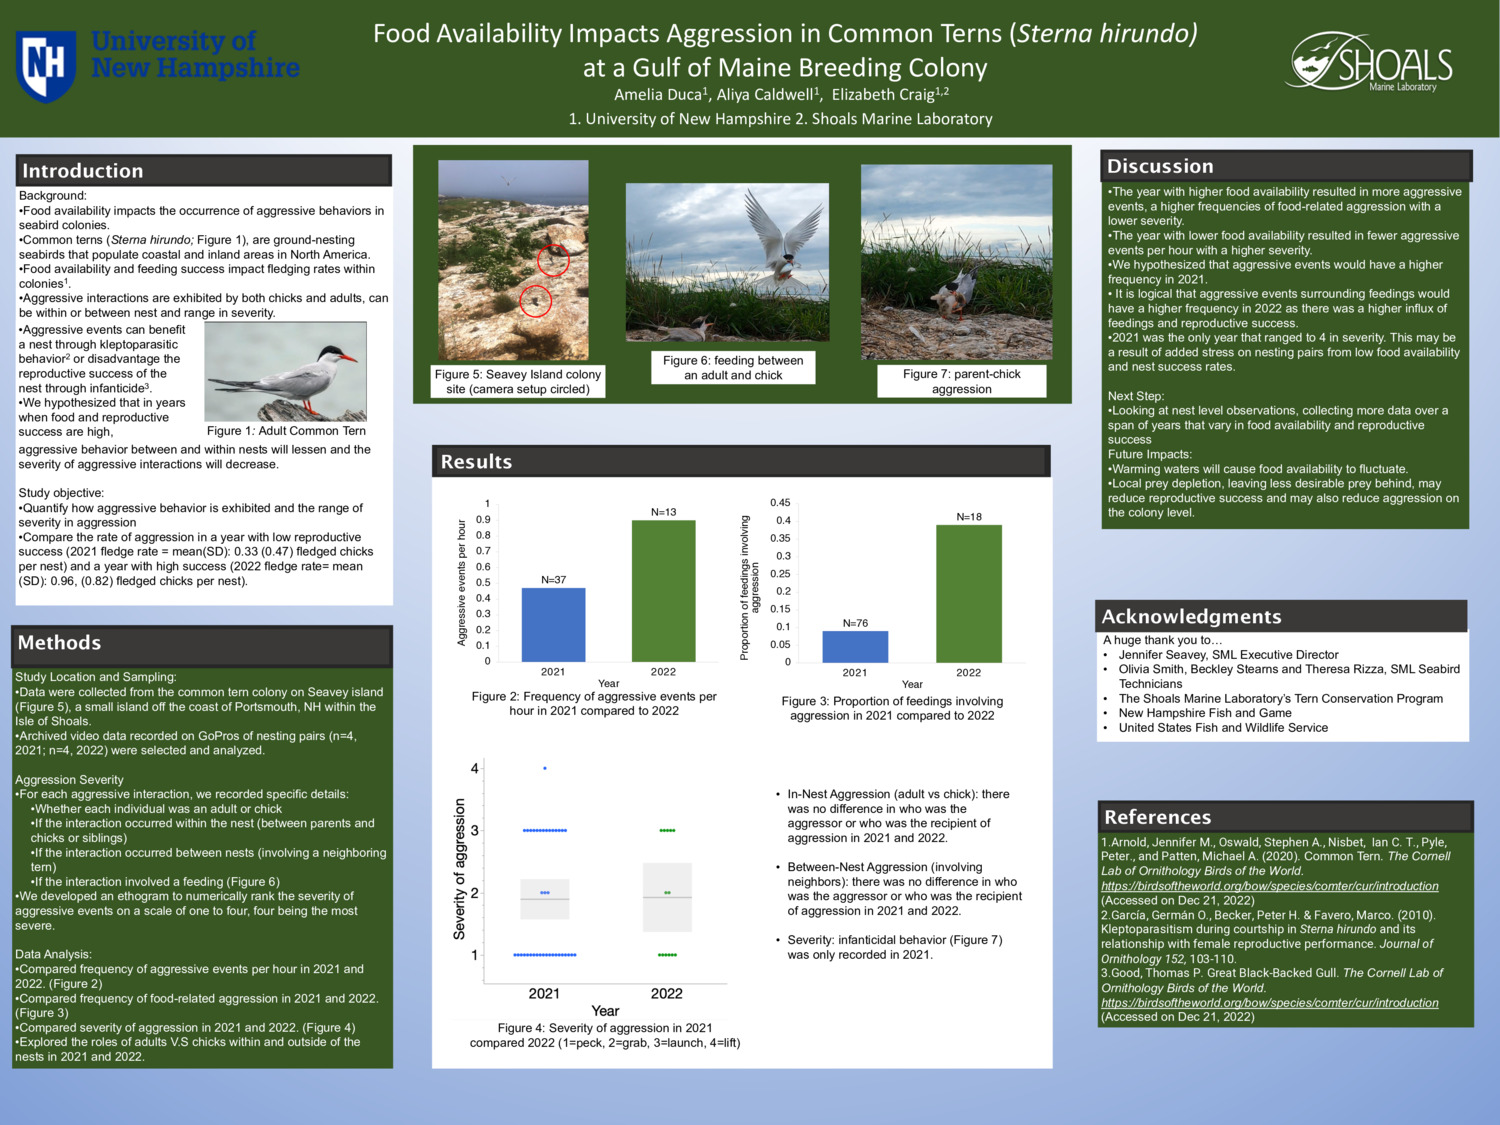 Food Availability Impacts Aggression In Common Terns (Sterna Hirundo) At A Gulf Of Maine Breeding Colony by aed1086